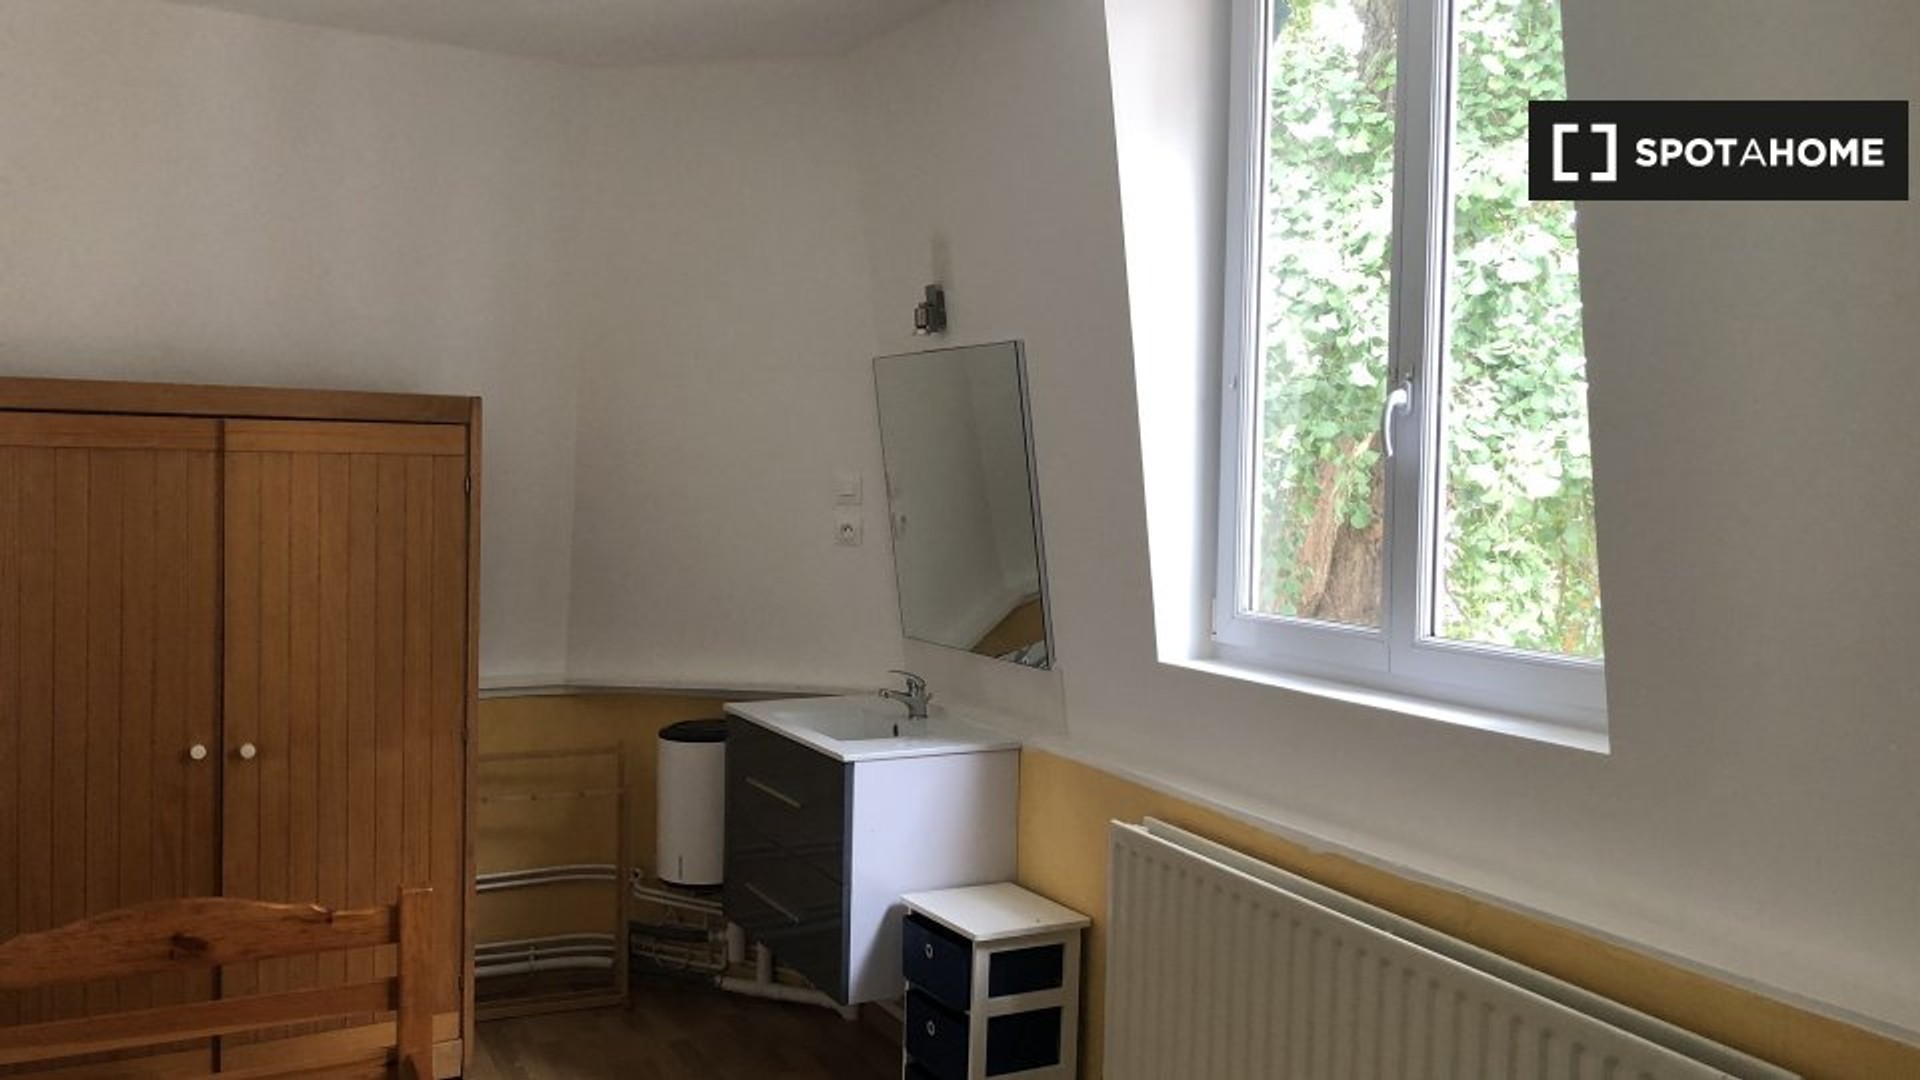 Cheap private room in Lille